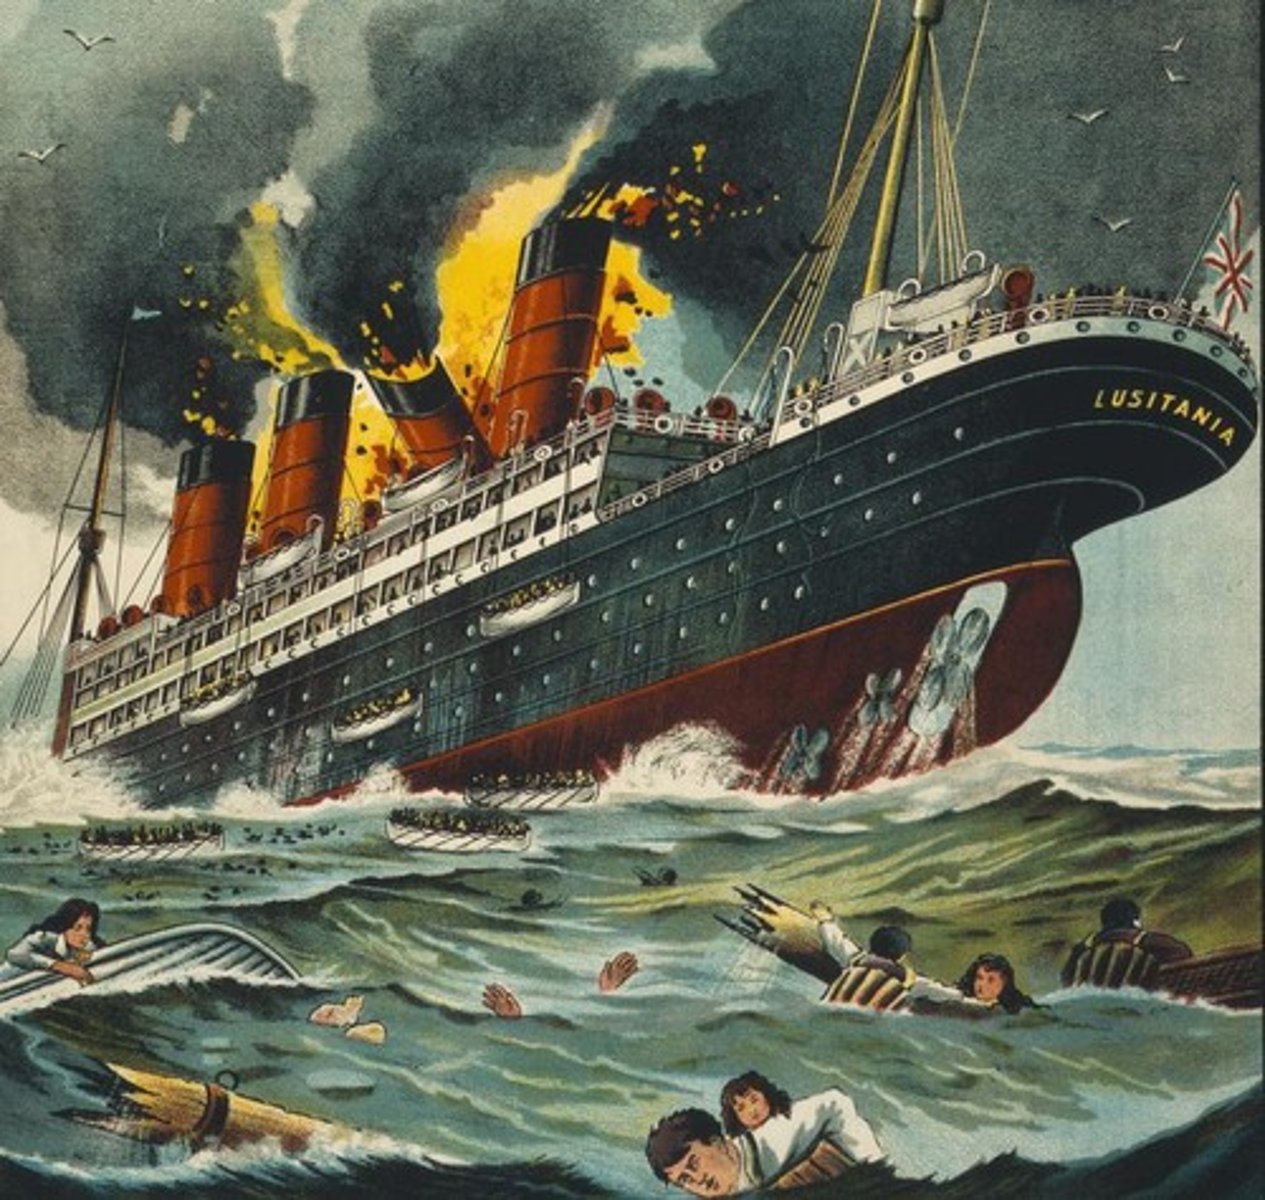 <p>A British passenger ship that was sunk by a German U-Boat on May 7, 1915. 128 Americans died. The sinking greatly turned American opinion against the Germans, helping the move towards entering the war.</p>